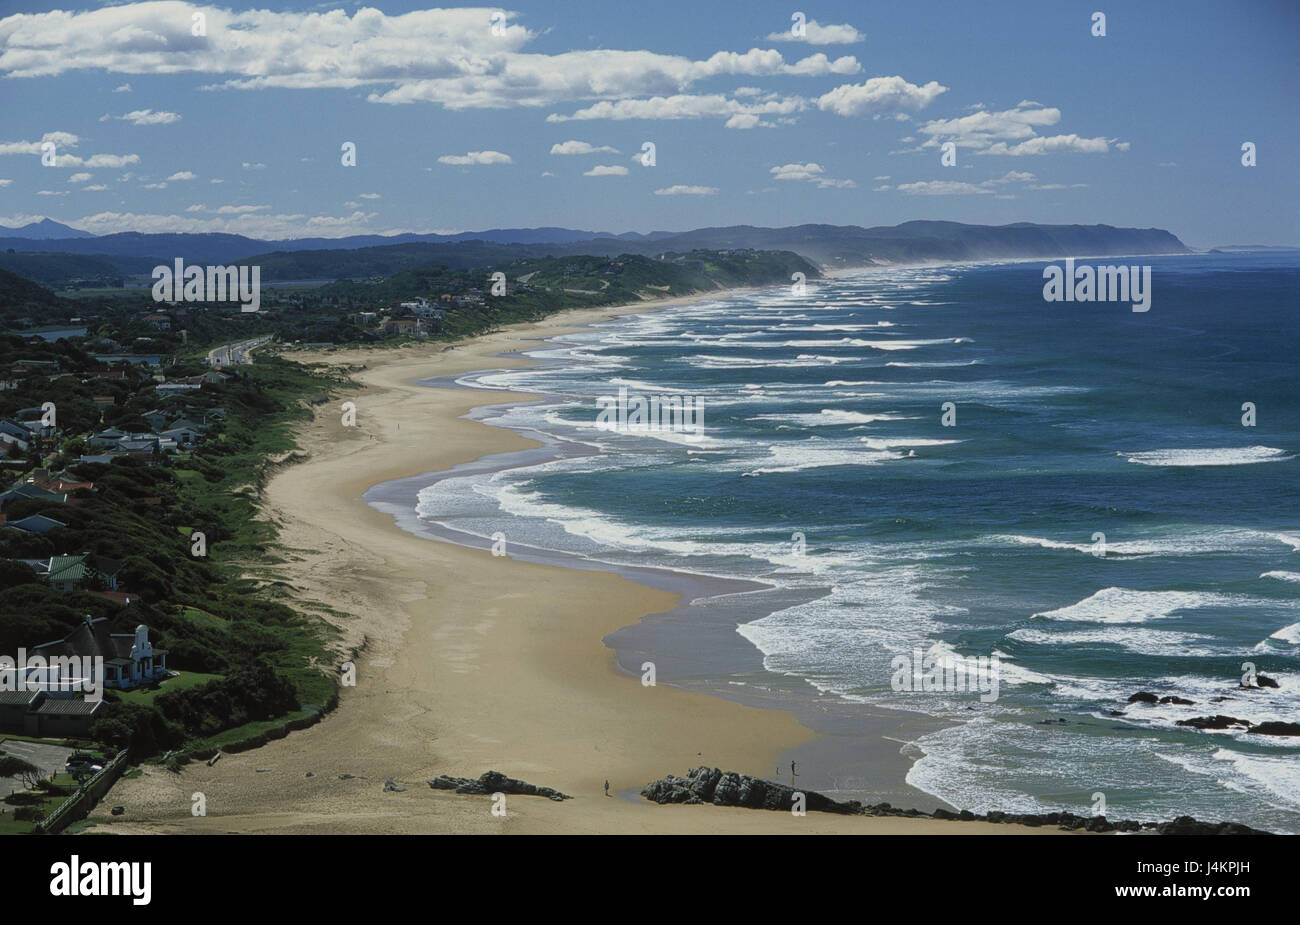 South Africa, western cape, guards route, Wilderness, local overview RSA, Africa, South Africa, west cape, west cape country, coast, coastal scenery, scenery, overview, Indian ocean, sea, place, place, houses, residential houses, place of interest, destination, Küstenstrasse, wetland, view, Stock Photo